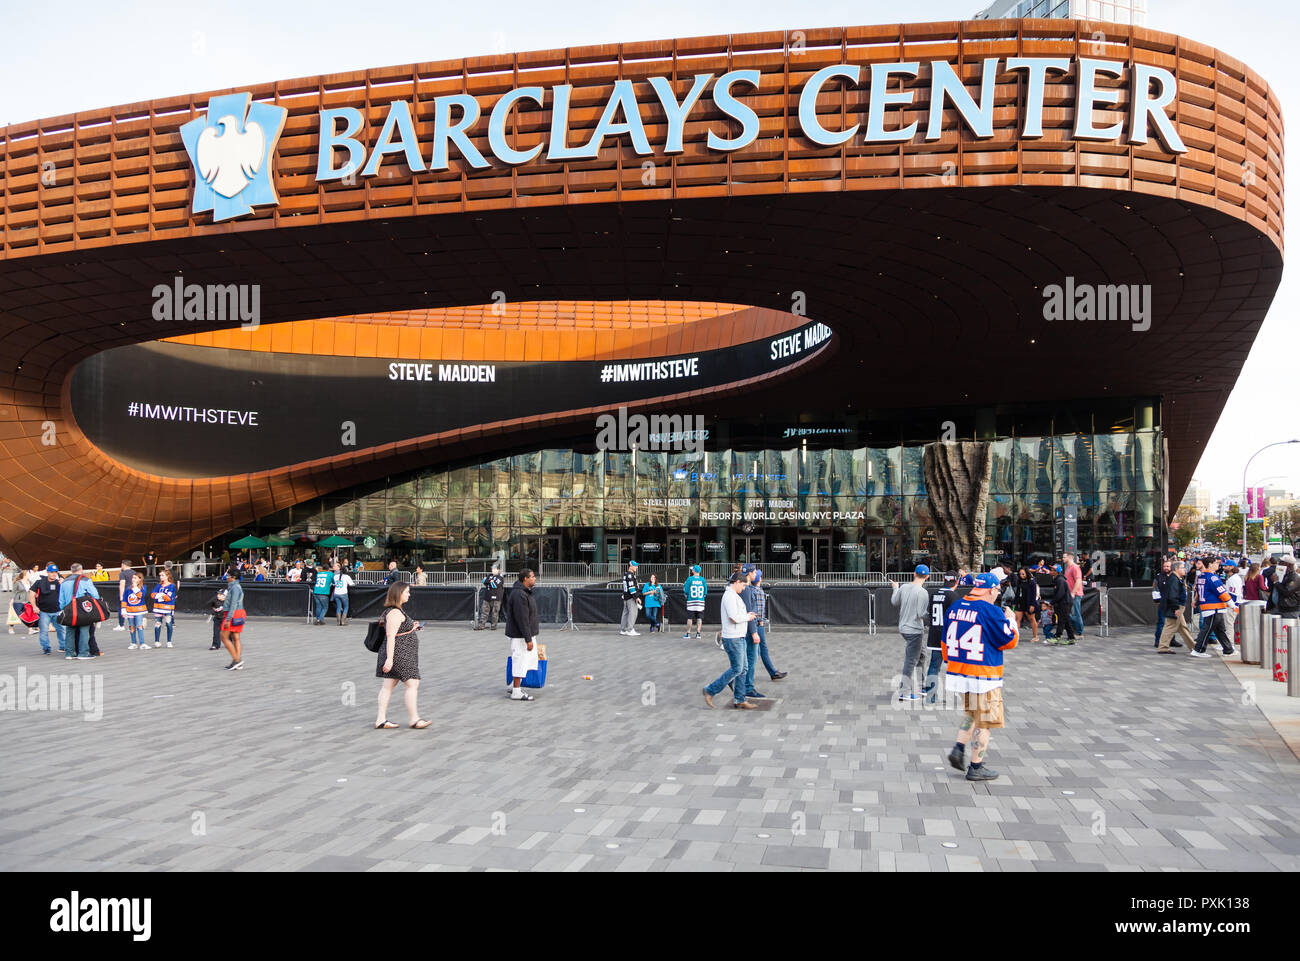 The Barclays Center, Brooklyn, is a multi purpose indoor arena.  The arena hosts basketball and ice hockey amongst other entertainment events. Stock Photo